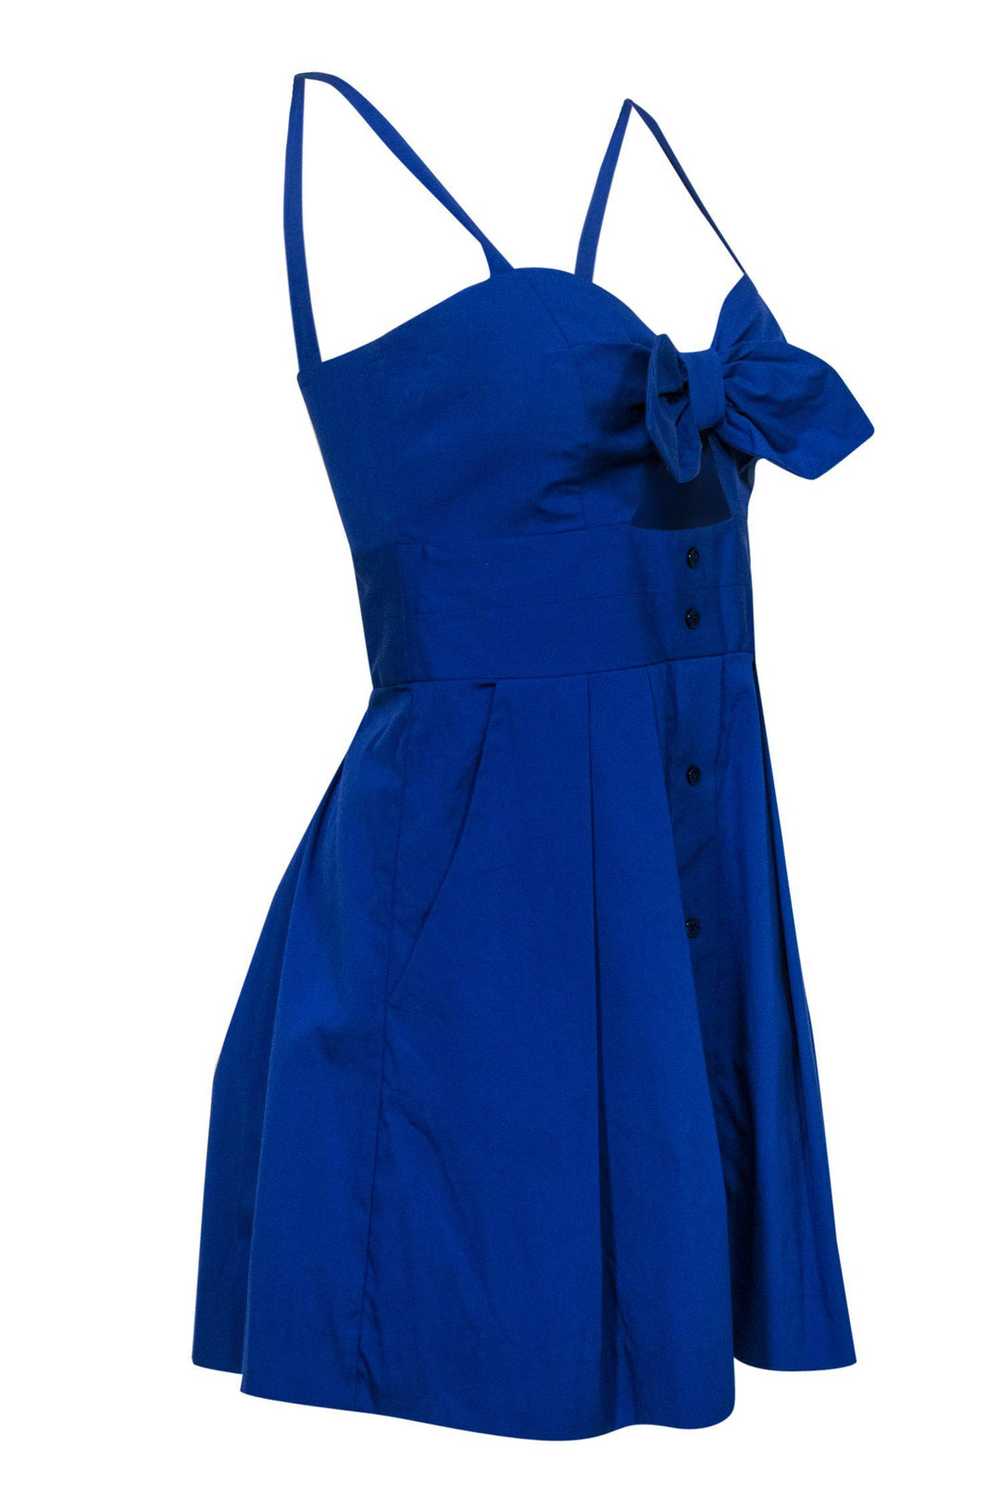 Milly - Royal Blue Fit & Flare Dress w/ Bow Sz 2 - image 2